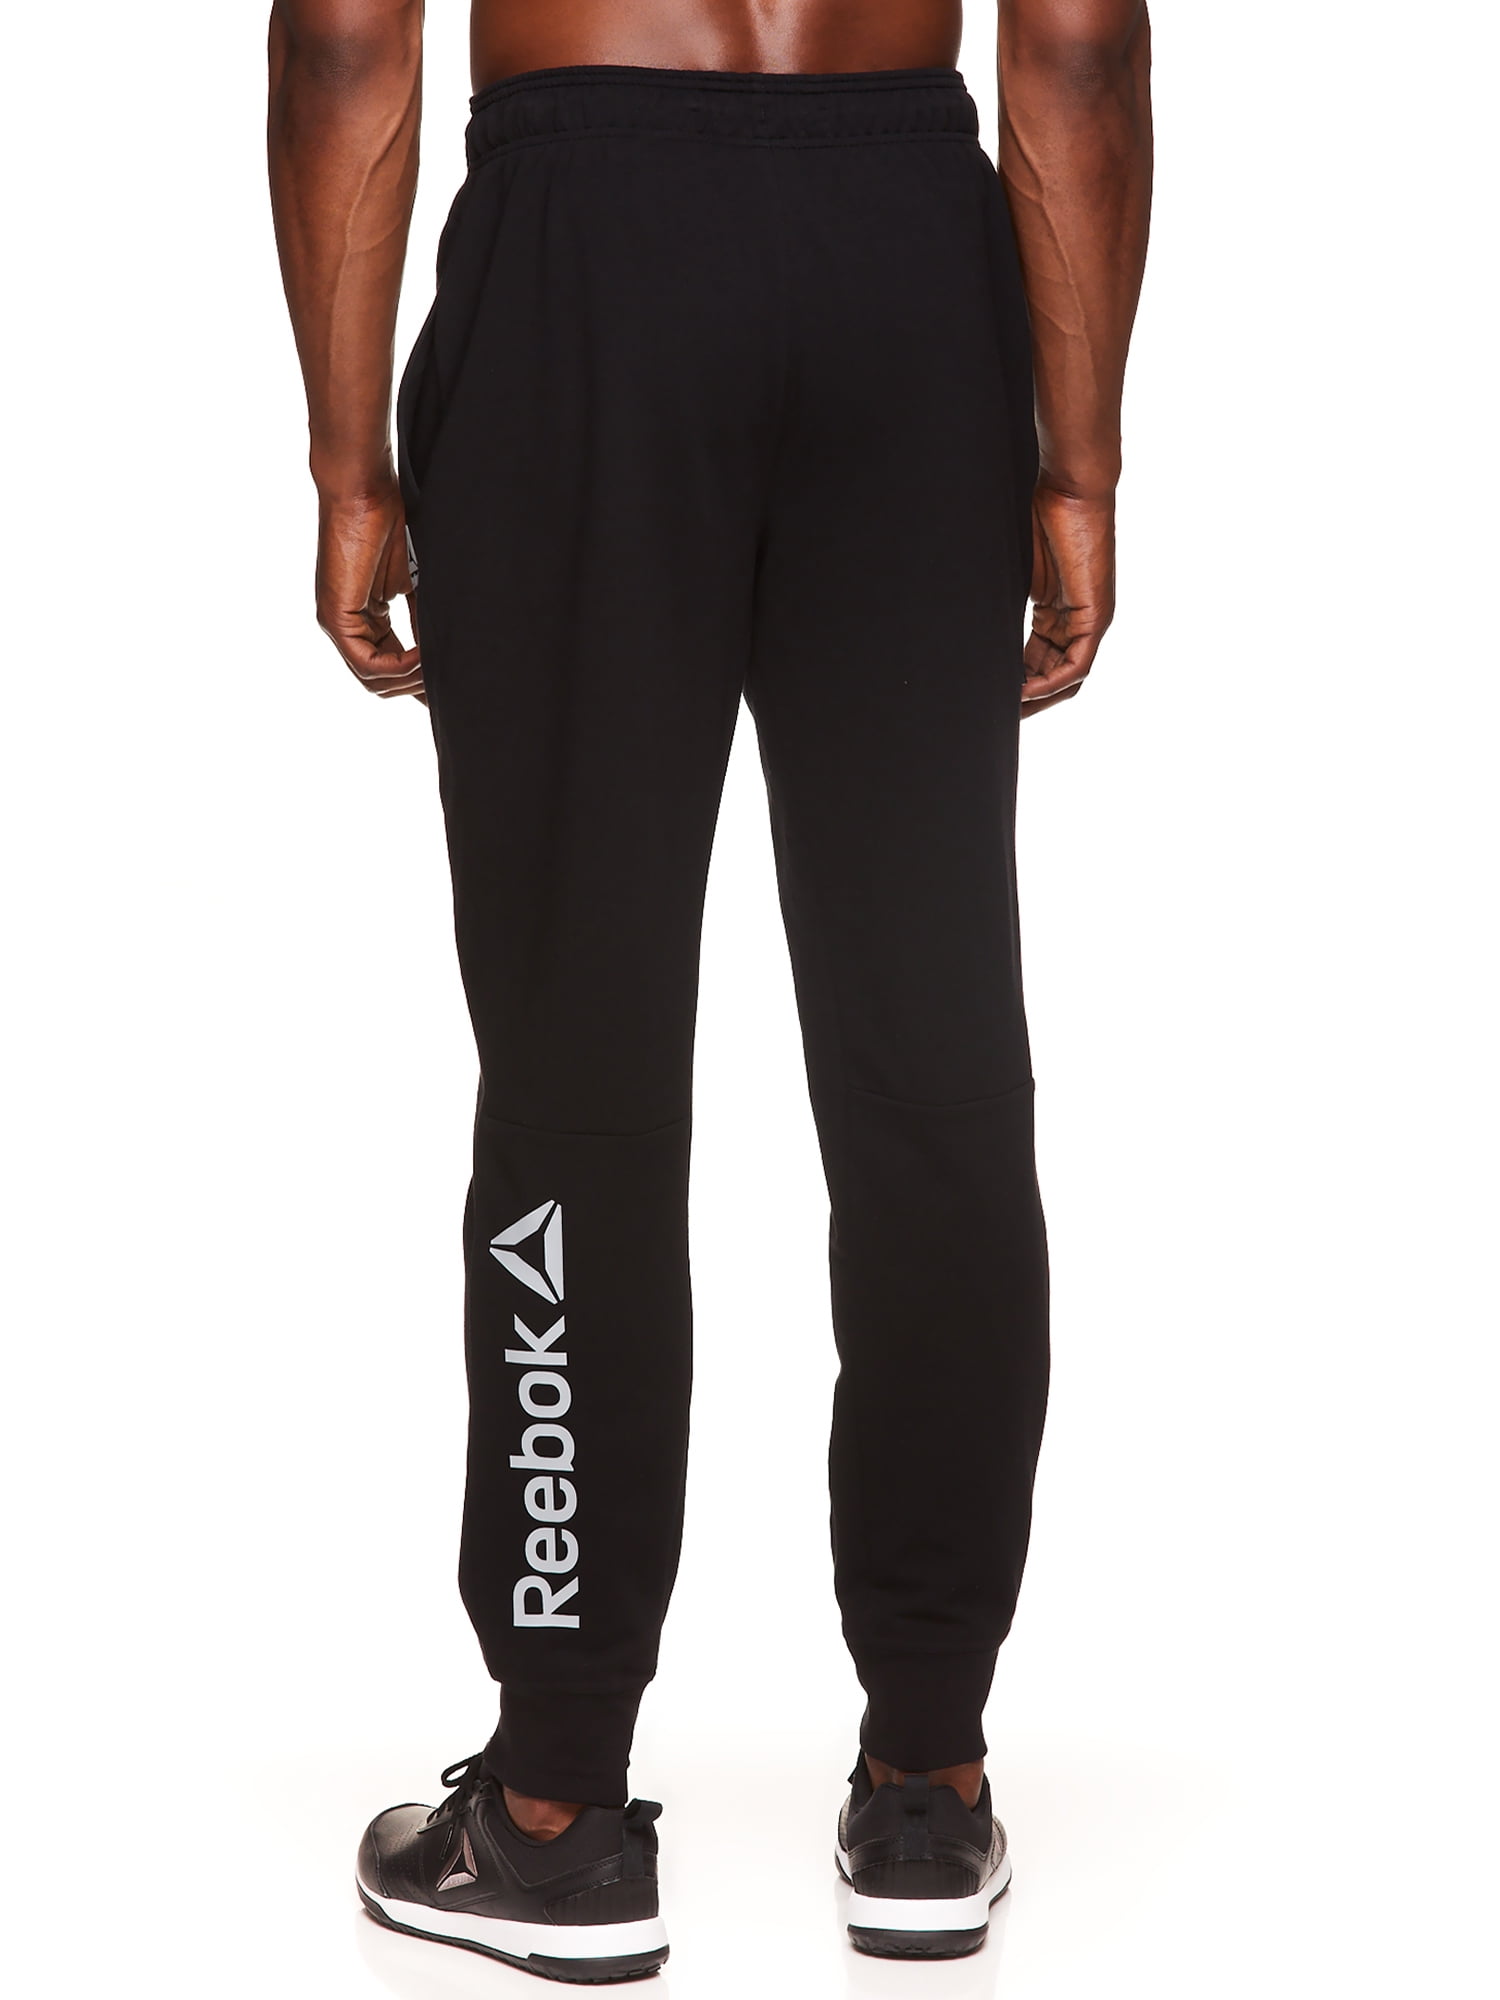 Reebok Men's and Big Men's Active Tech Terry Pants, up to Size 3XL